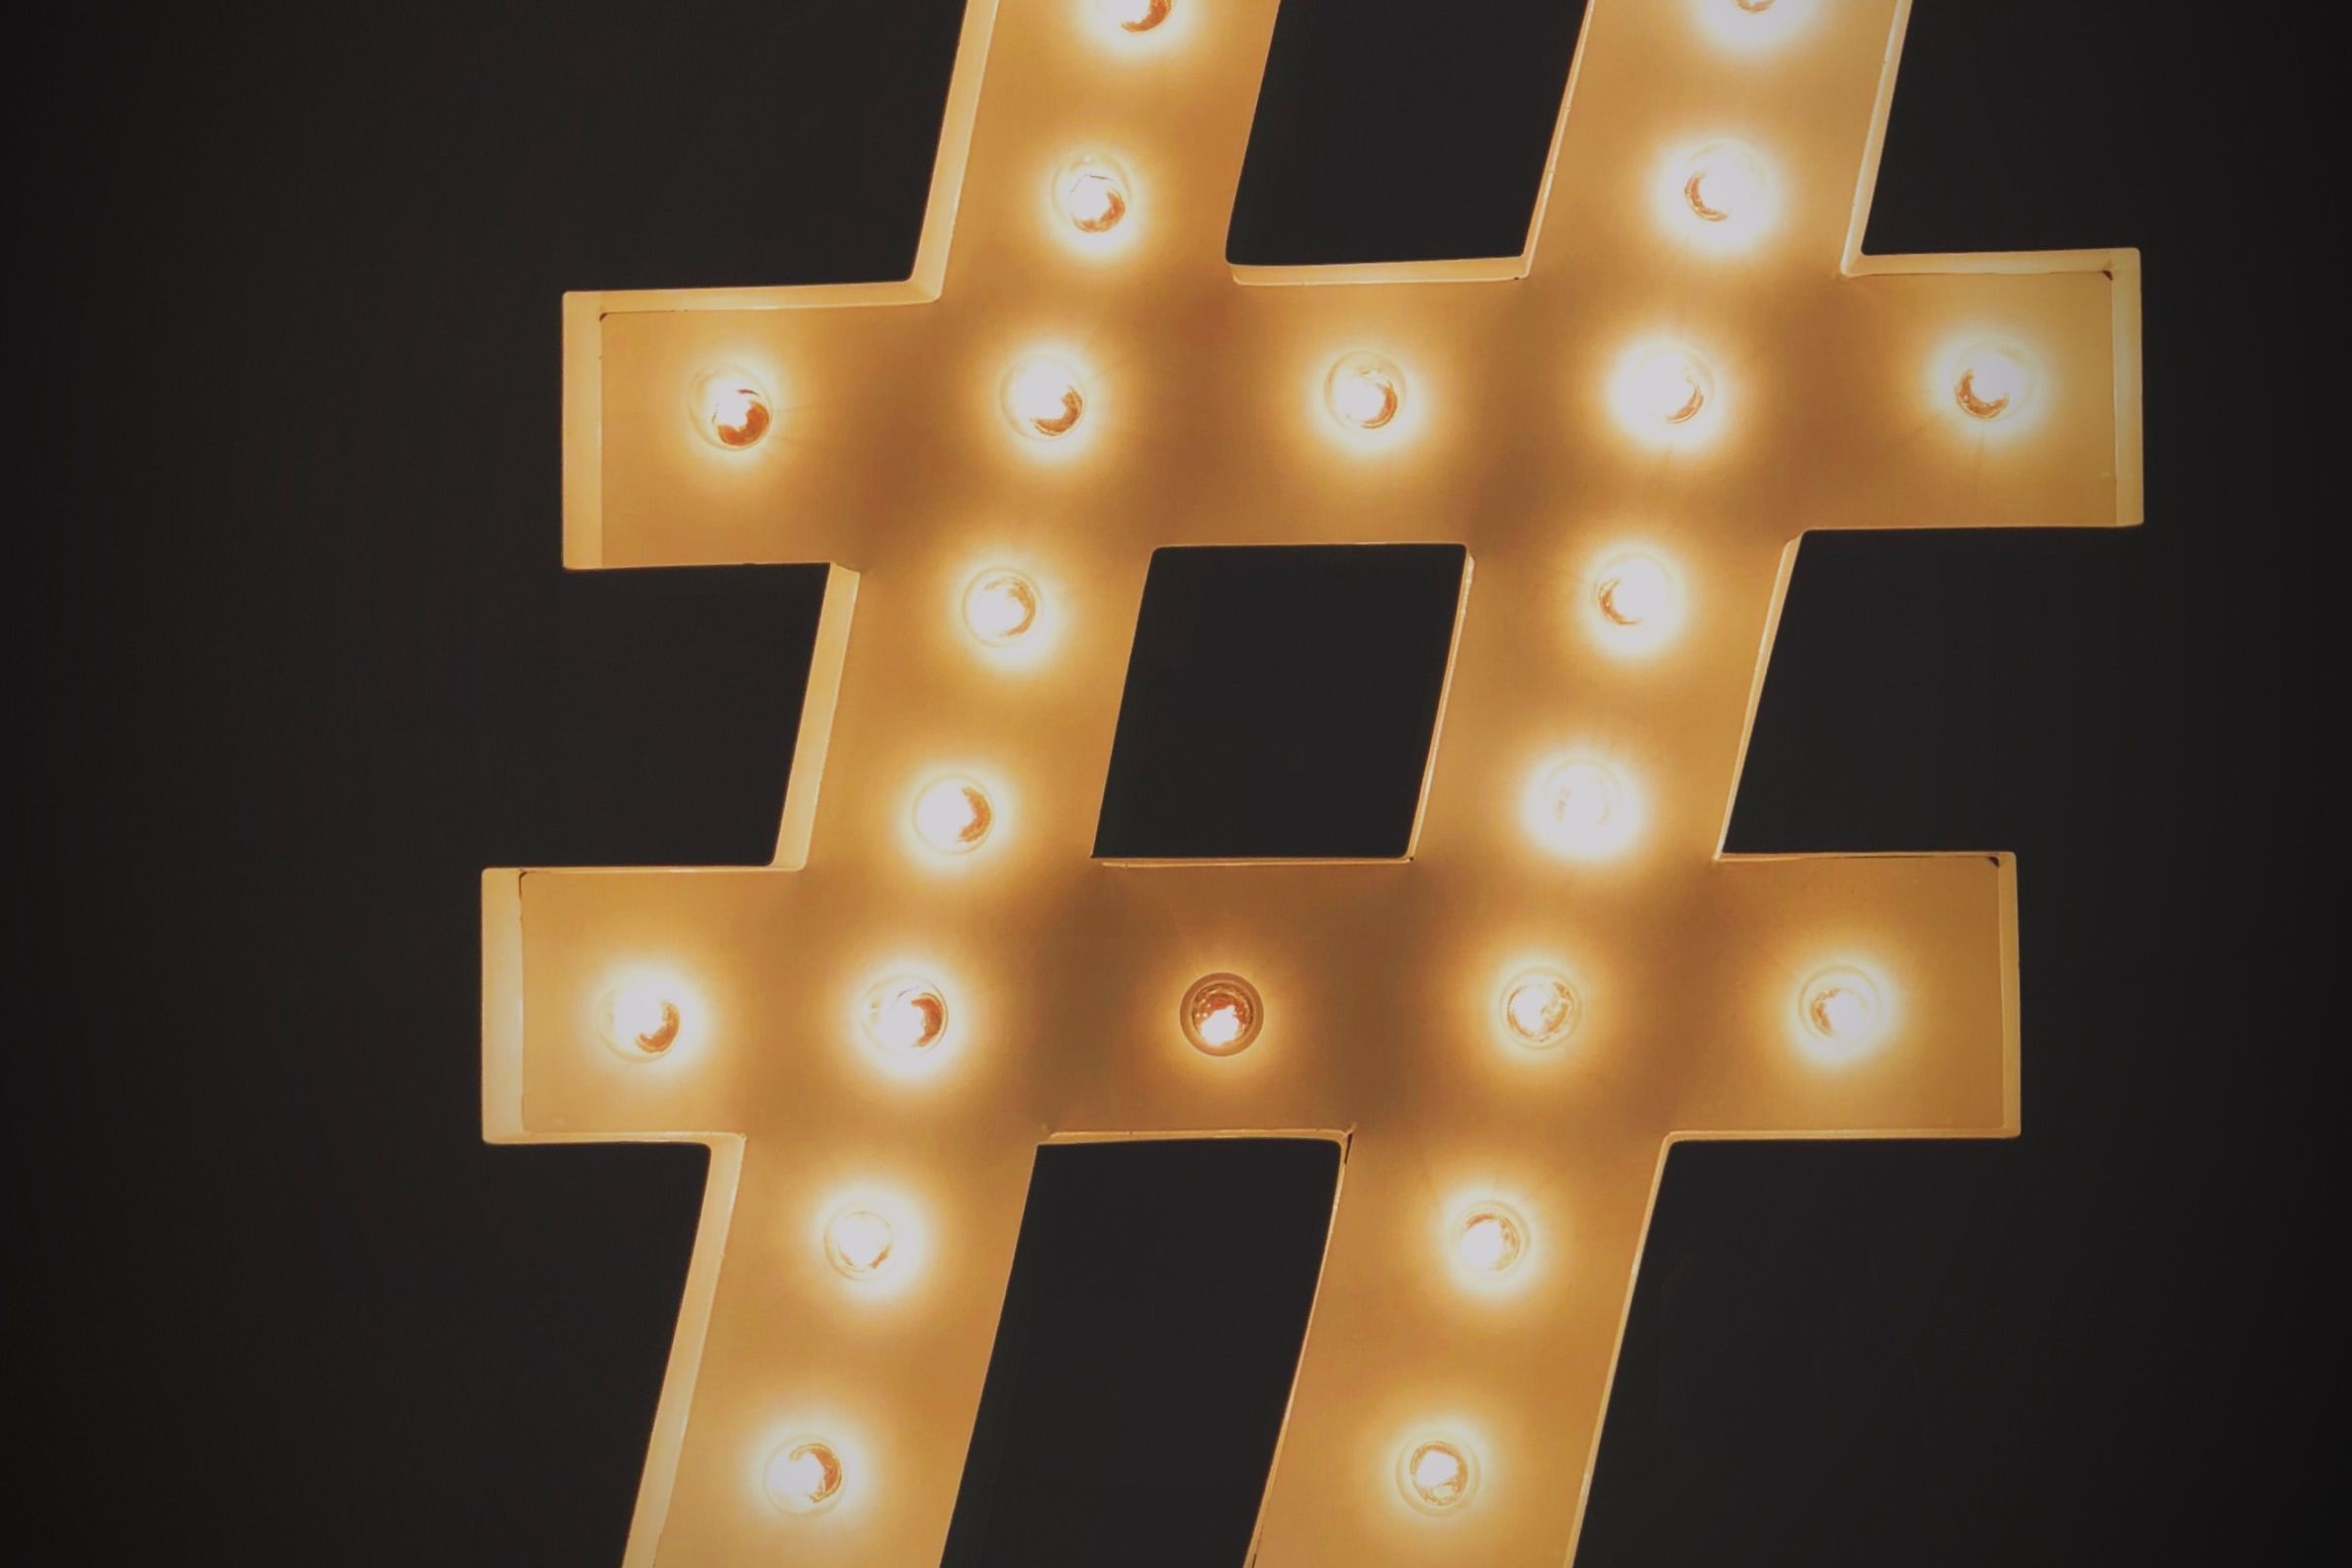 Hashtags for Every Day of the Week